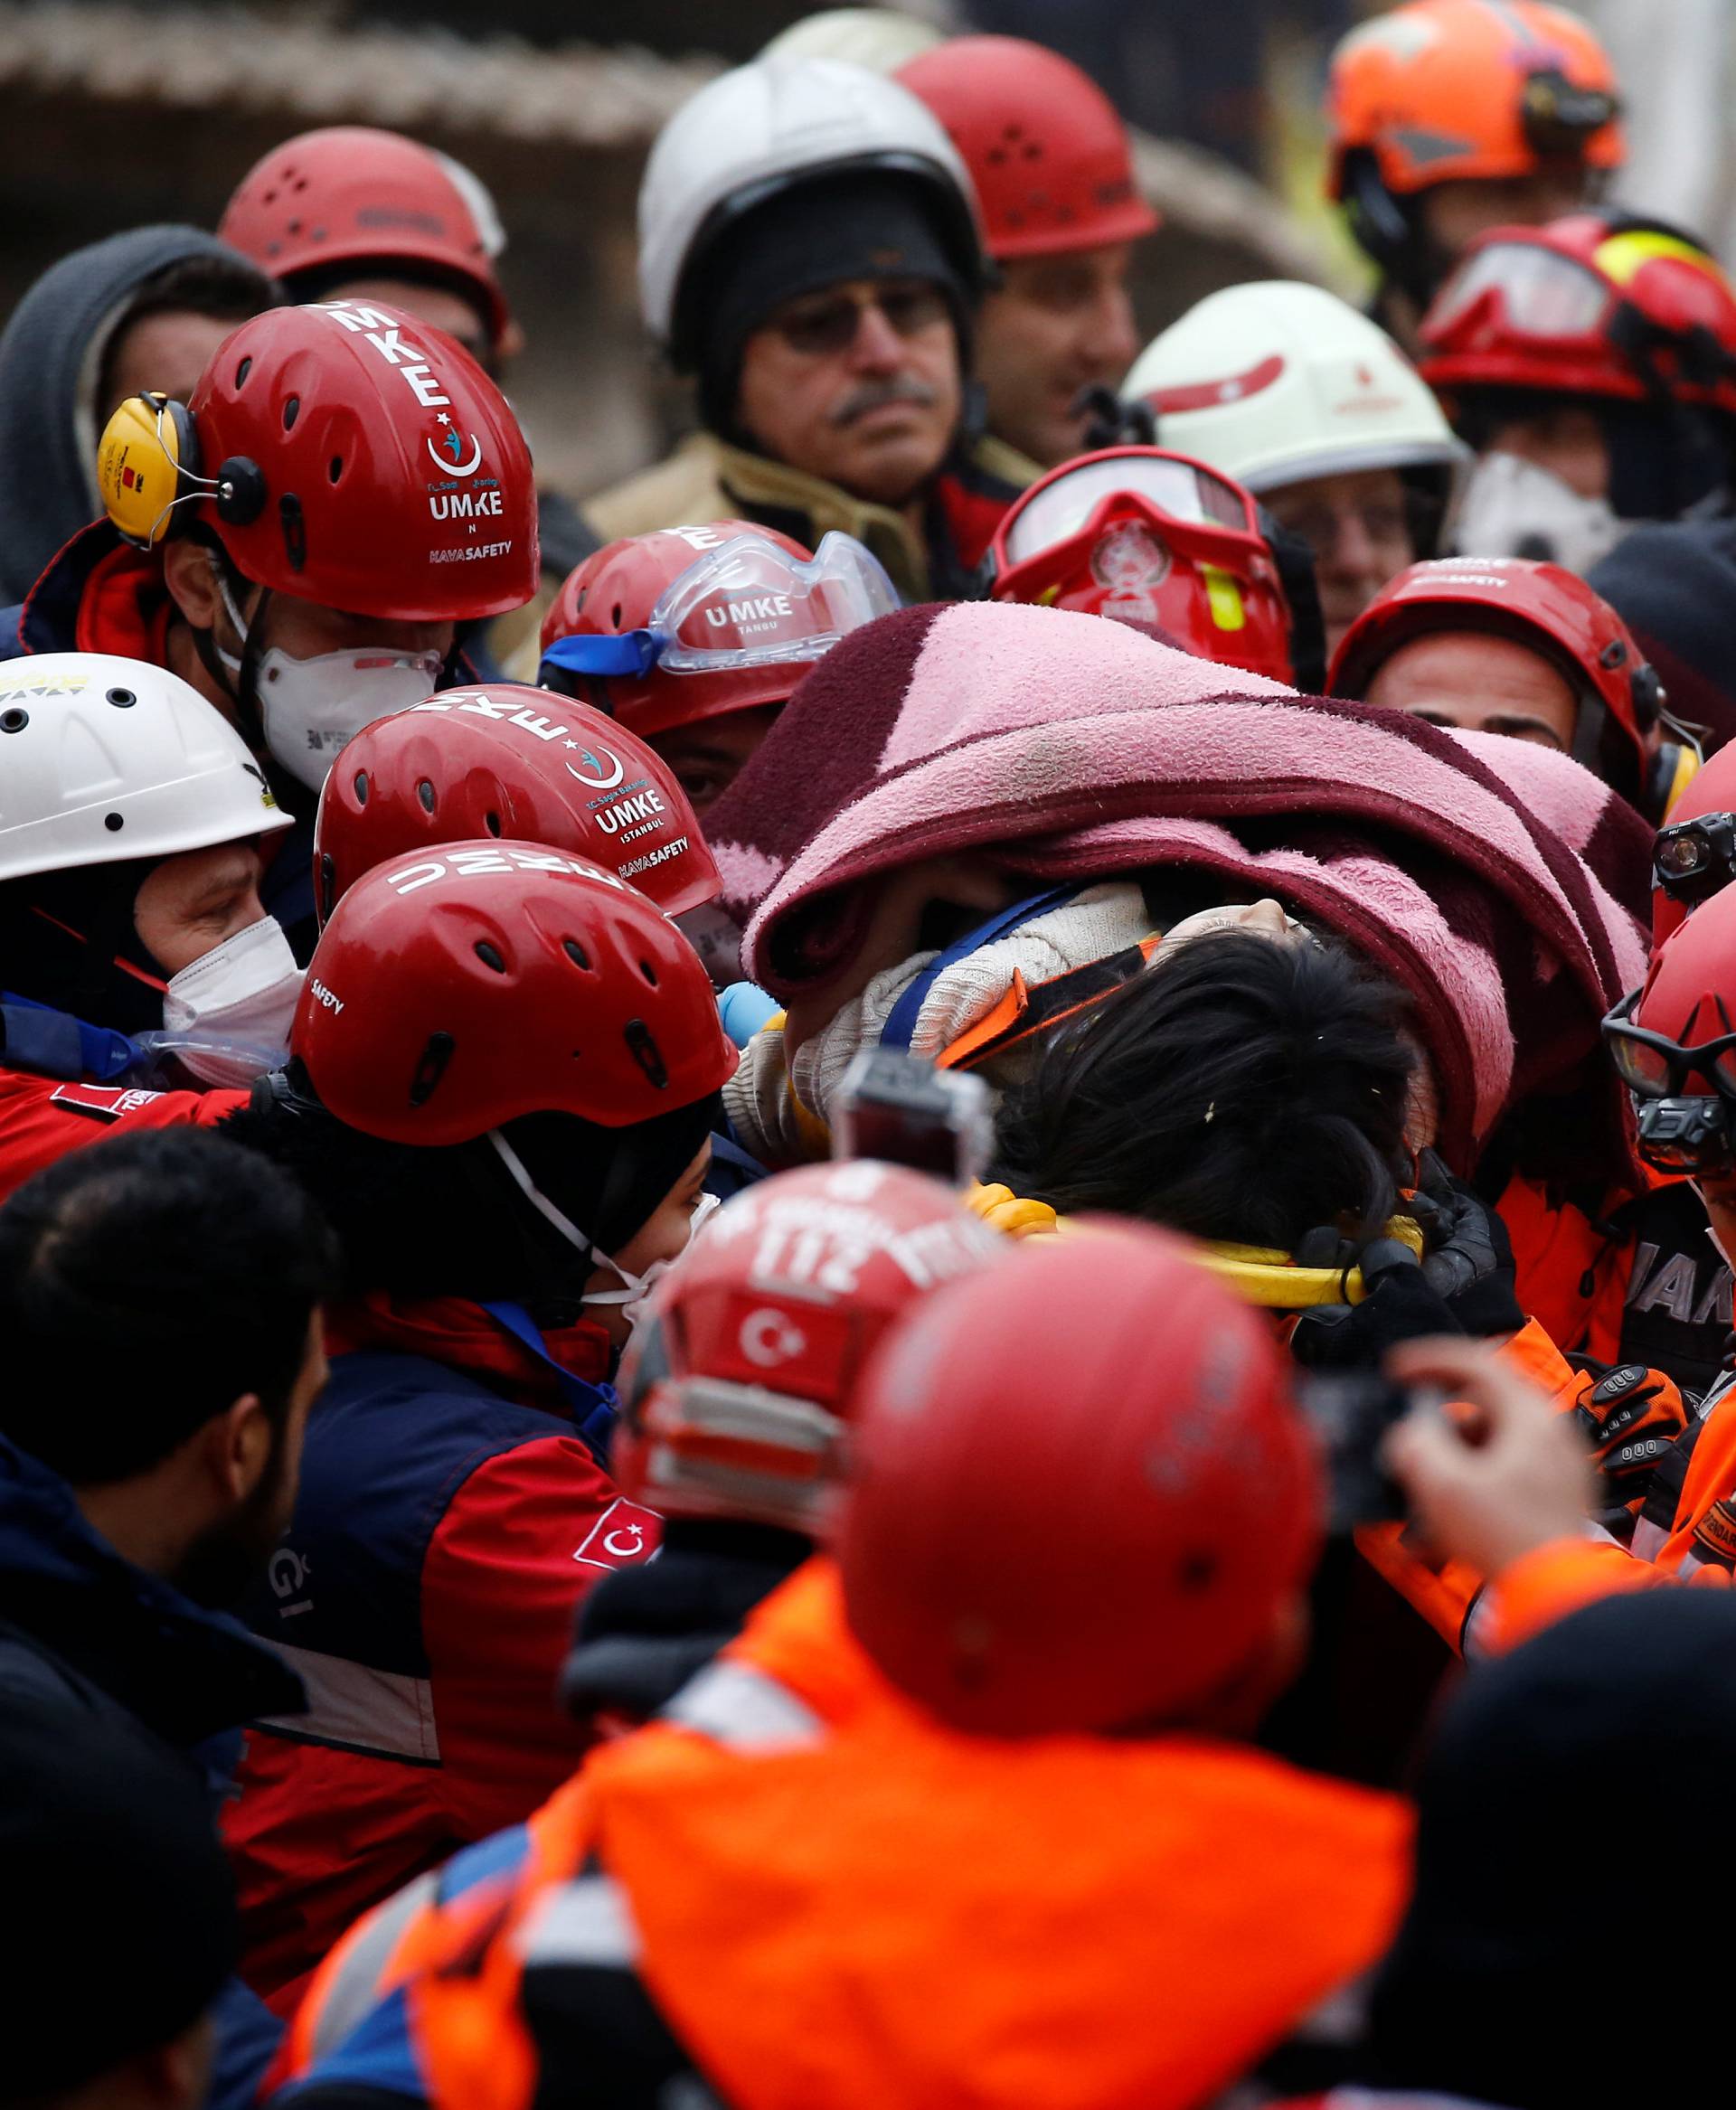 Site of a collapsed residential building in Istanbul